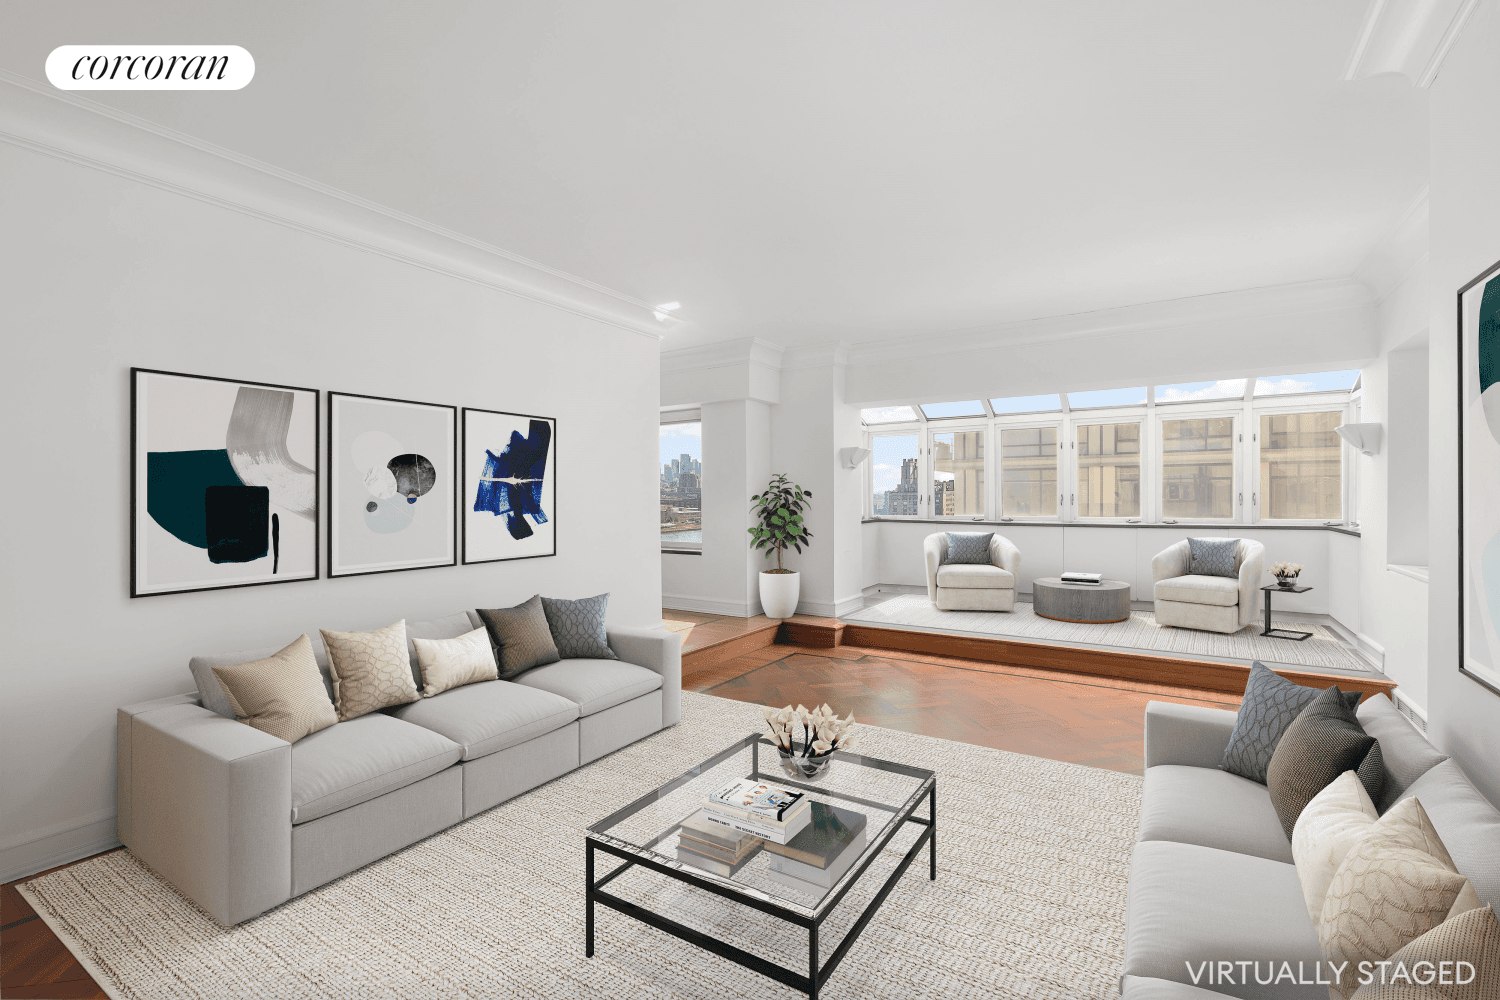 Enter this residence and experience the extraordinary river and city views from all four exposures through huge panoramic tilt and turn windows.